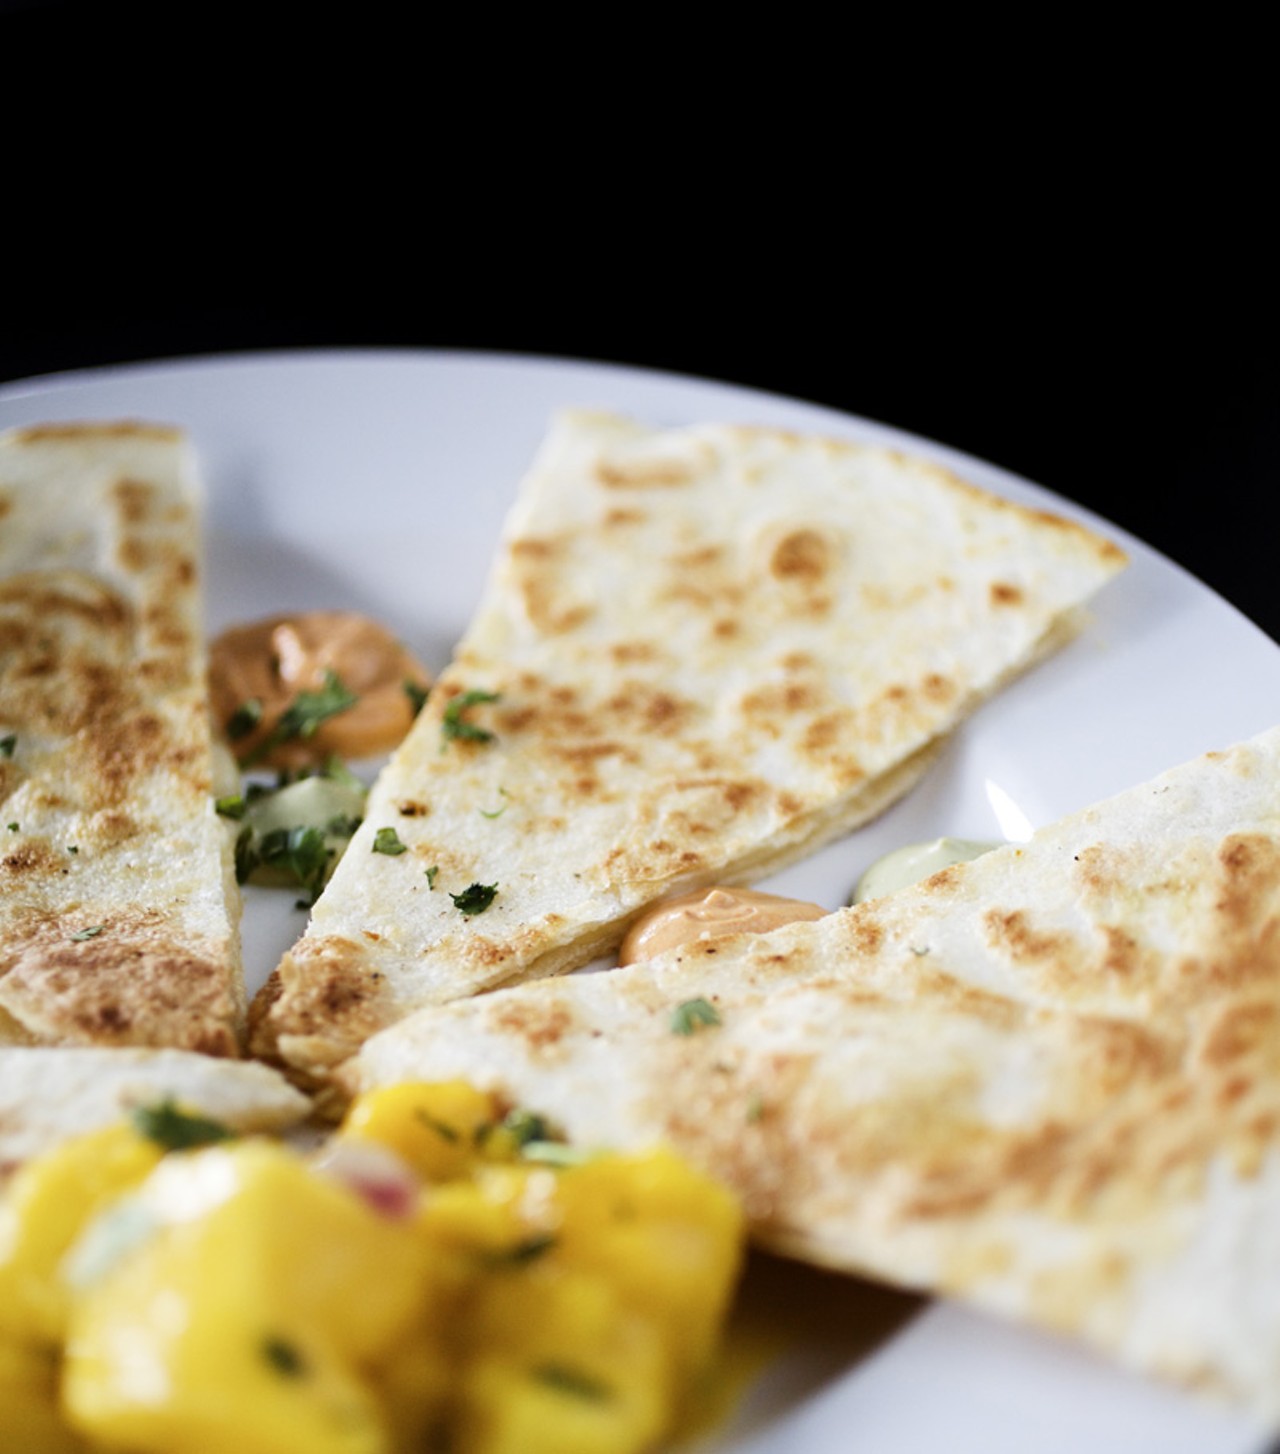 Also from the appetizer list comes three different types of quesadilla. You can get the grilled portabella, chicken, or shrimp quesadilla. They all come with mango salsa on the side.